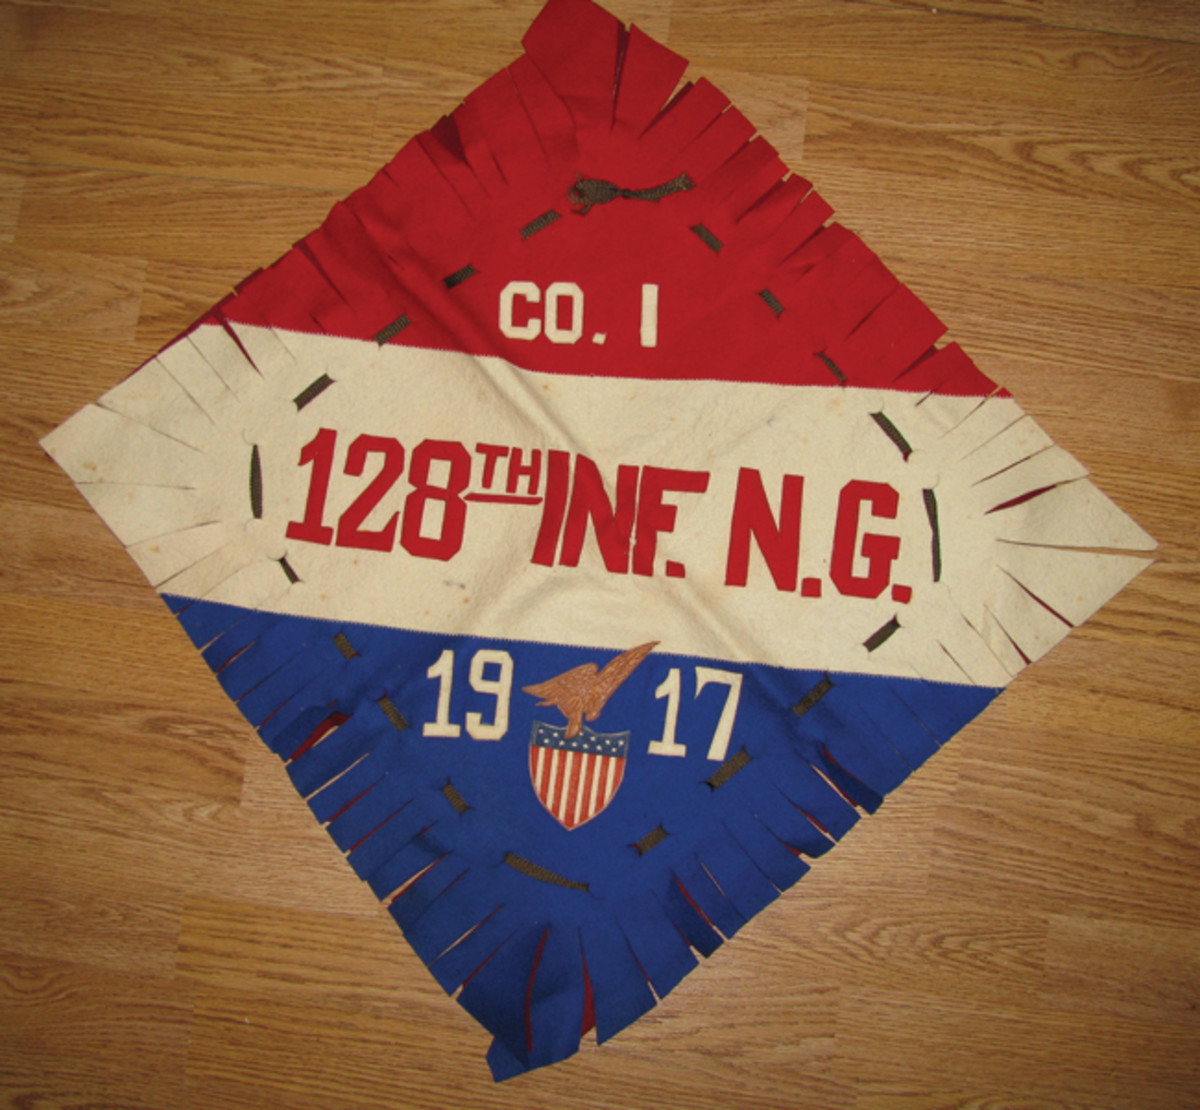  WWI multi-piece covers featured unit designations, such as the 128th Infantry, National Guard-decorated piece.